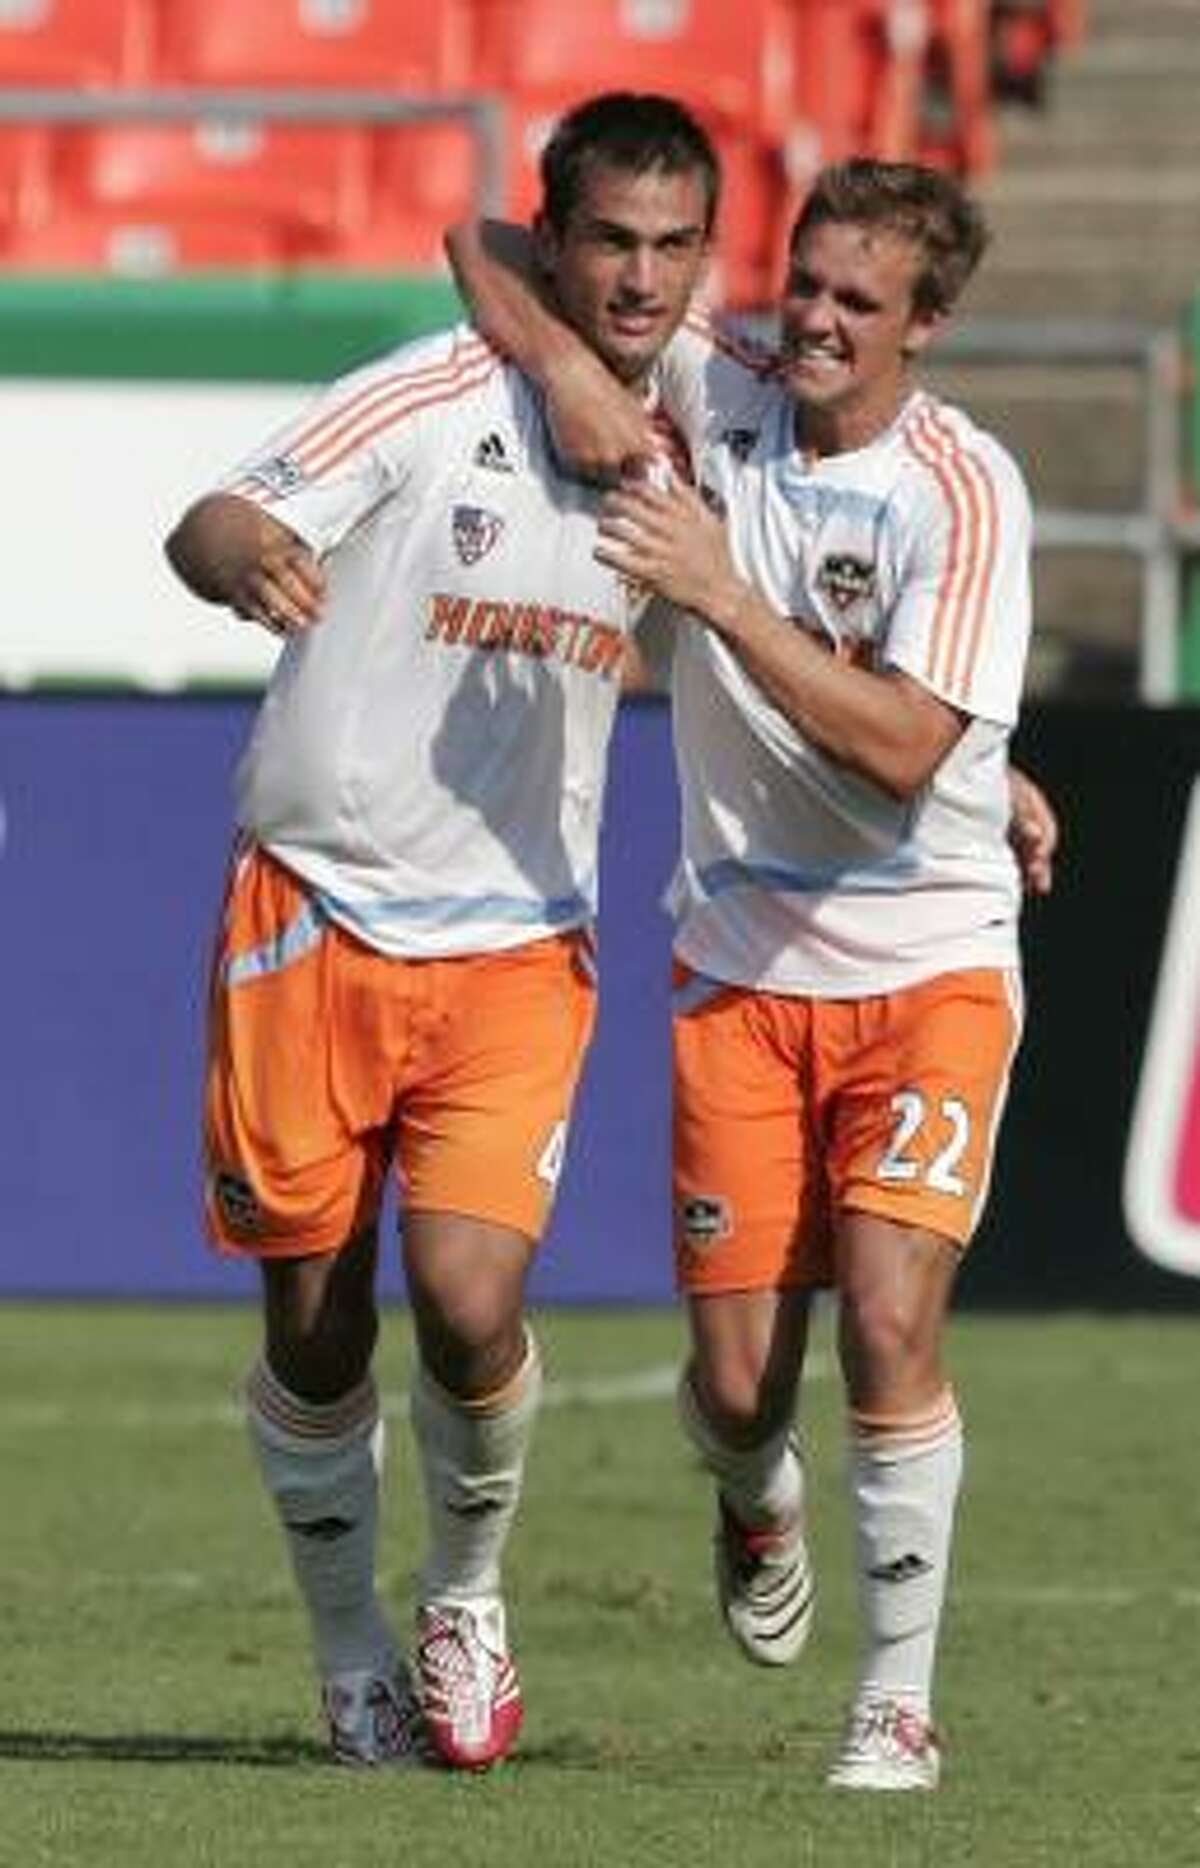 The Dynamo's Patrick Ianni, left, and Stuart Holden celebrate after hooking up on the game-winning goal against the Wizards at Kansas City, Mo.